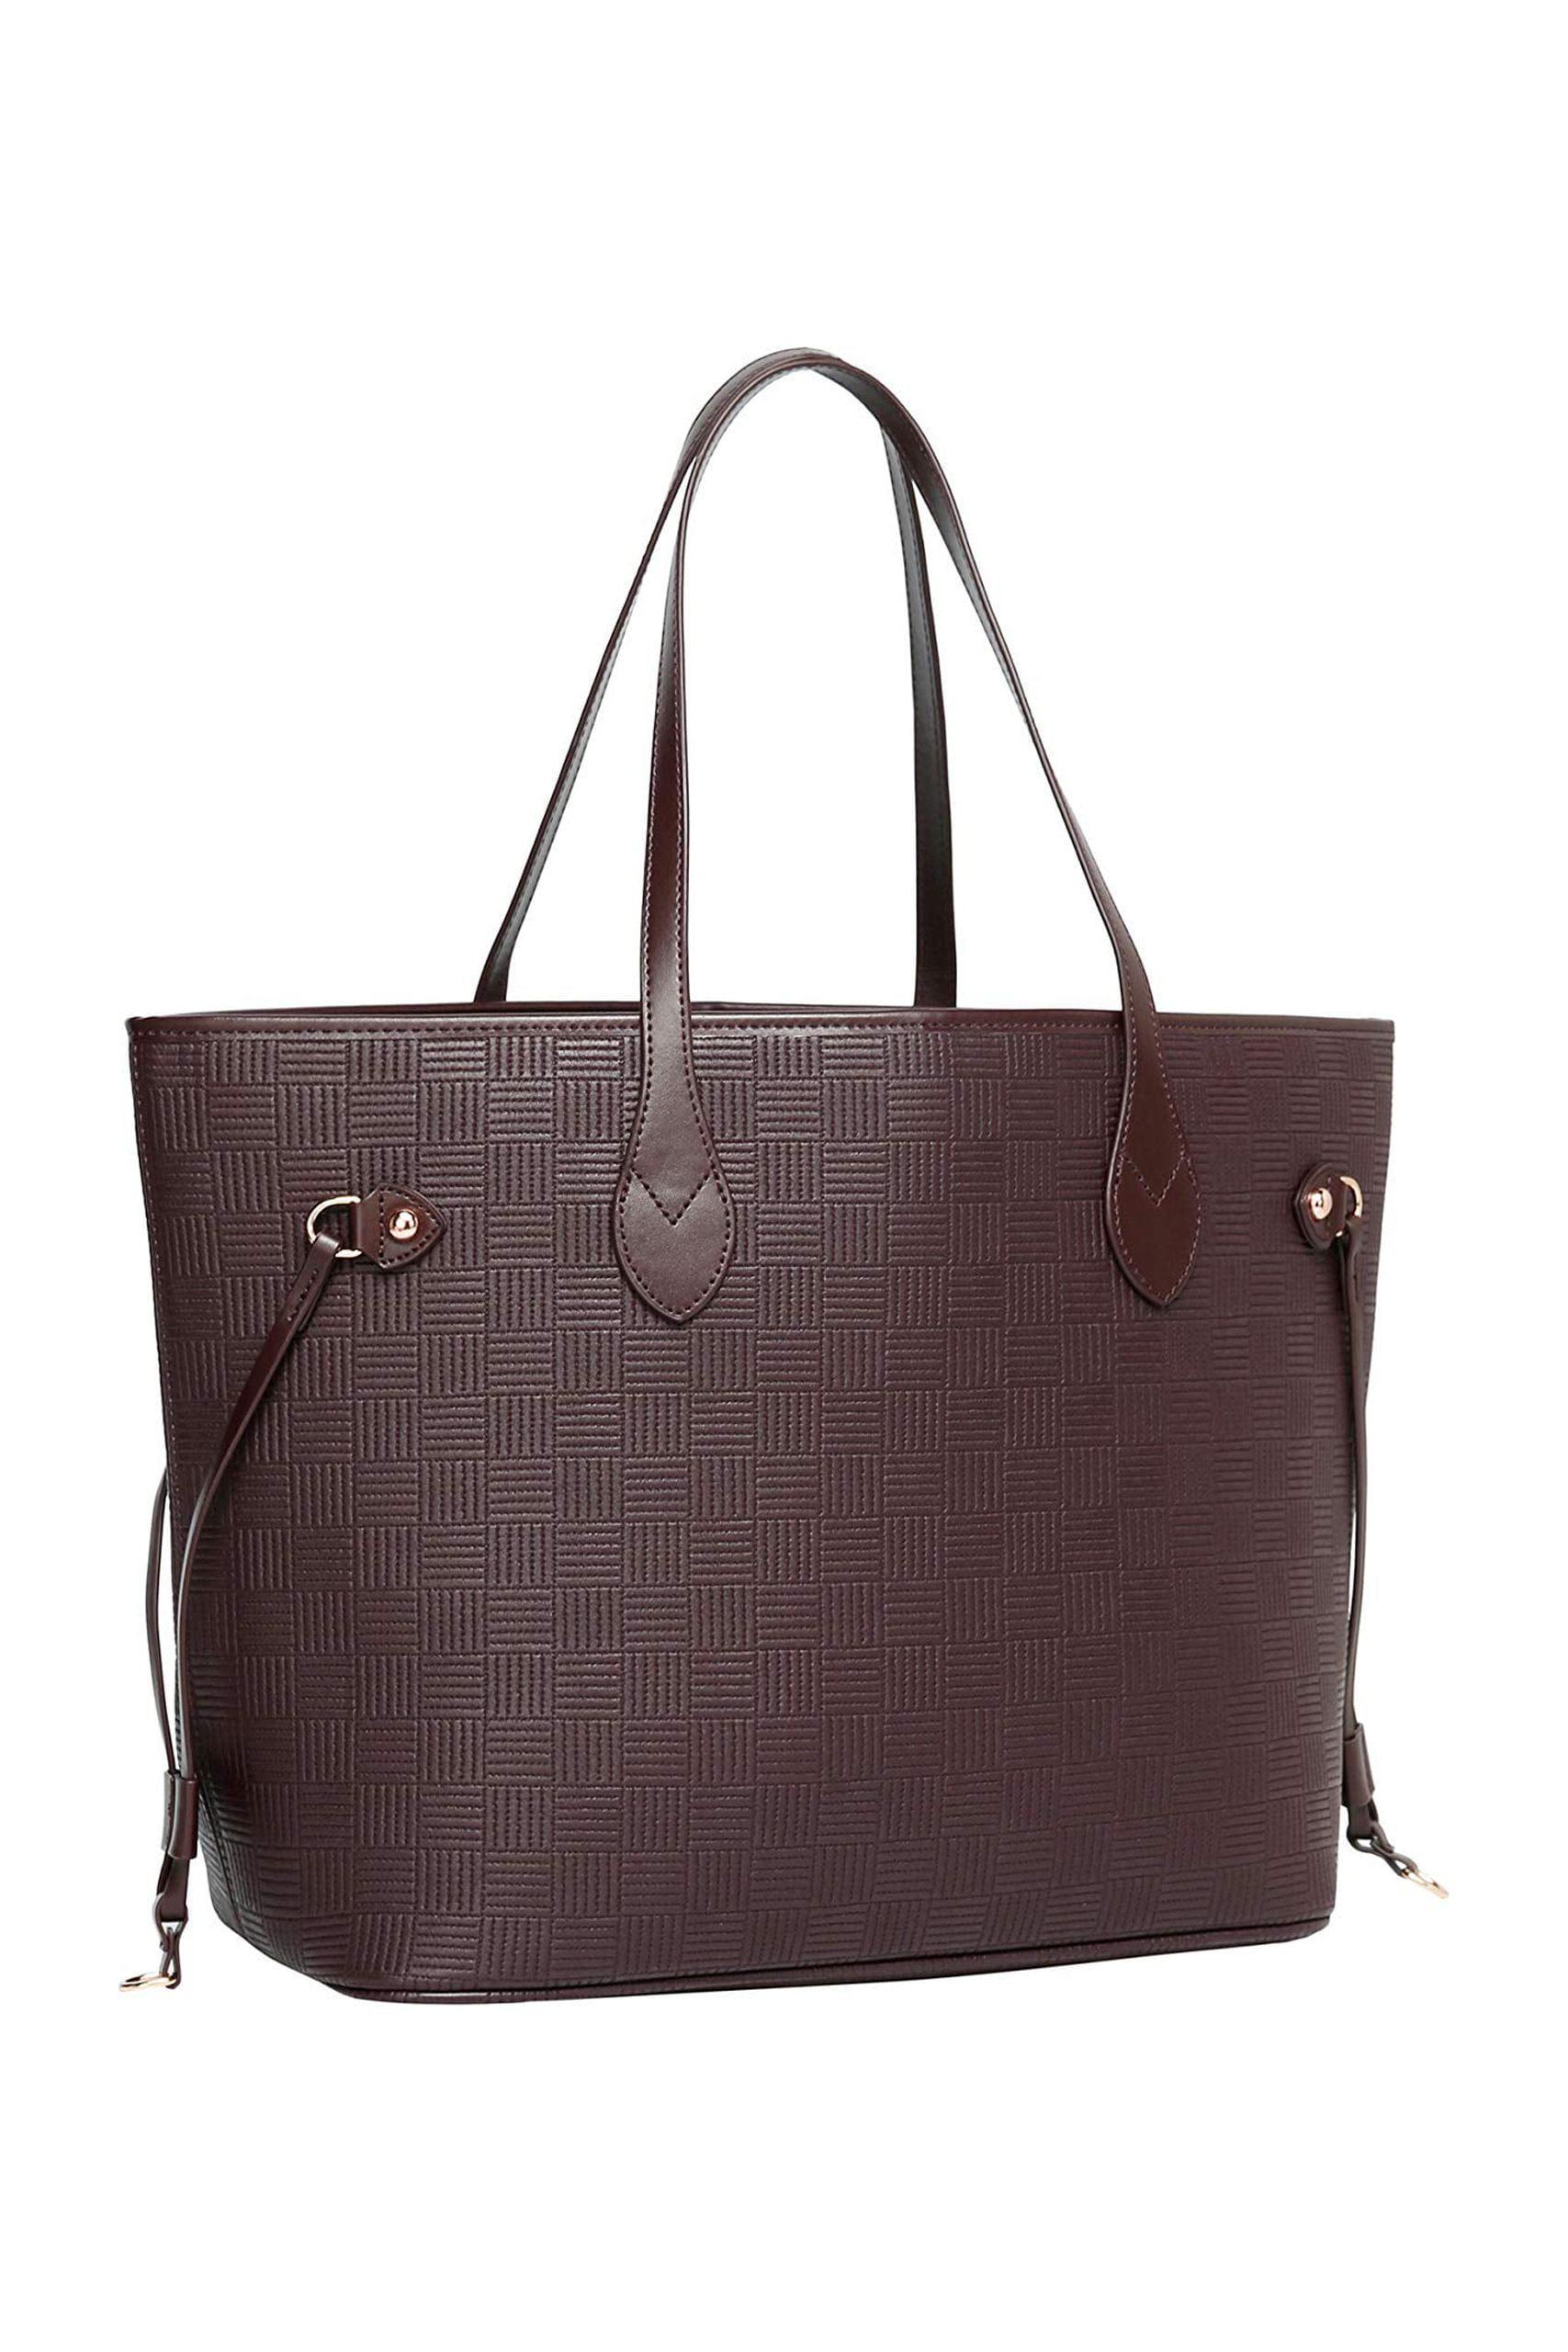 Daisy Rose Luxury Checkered White Tote Bag - $60 (60% Off Retail